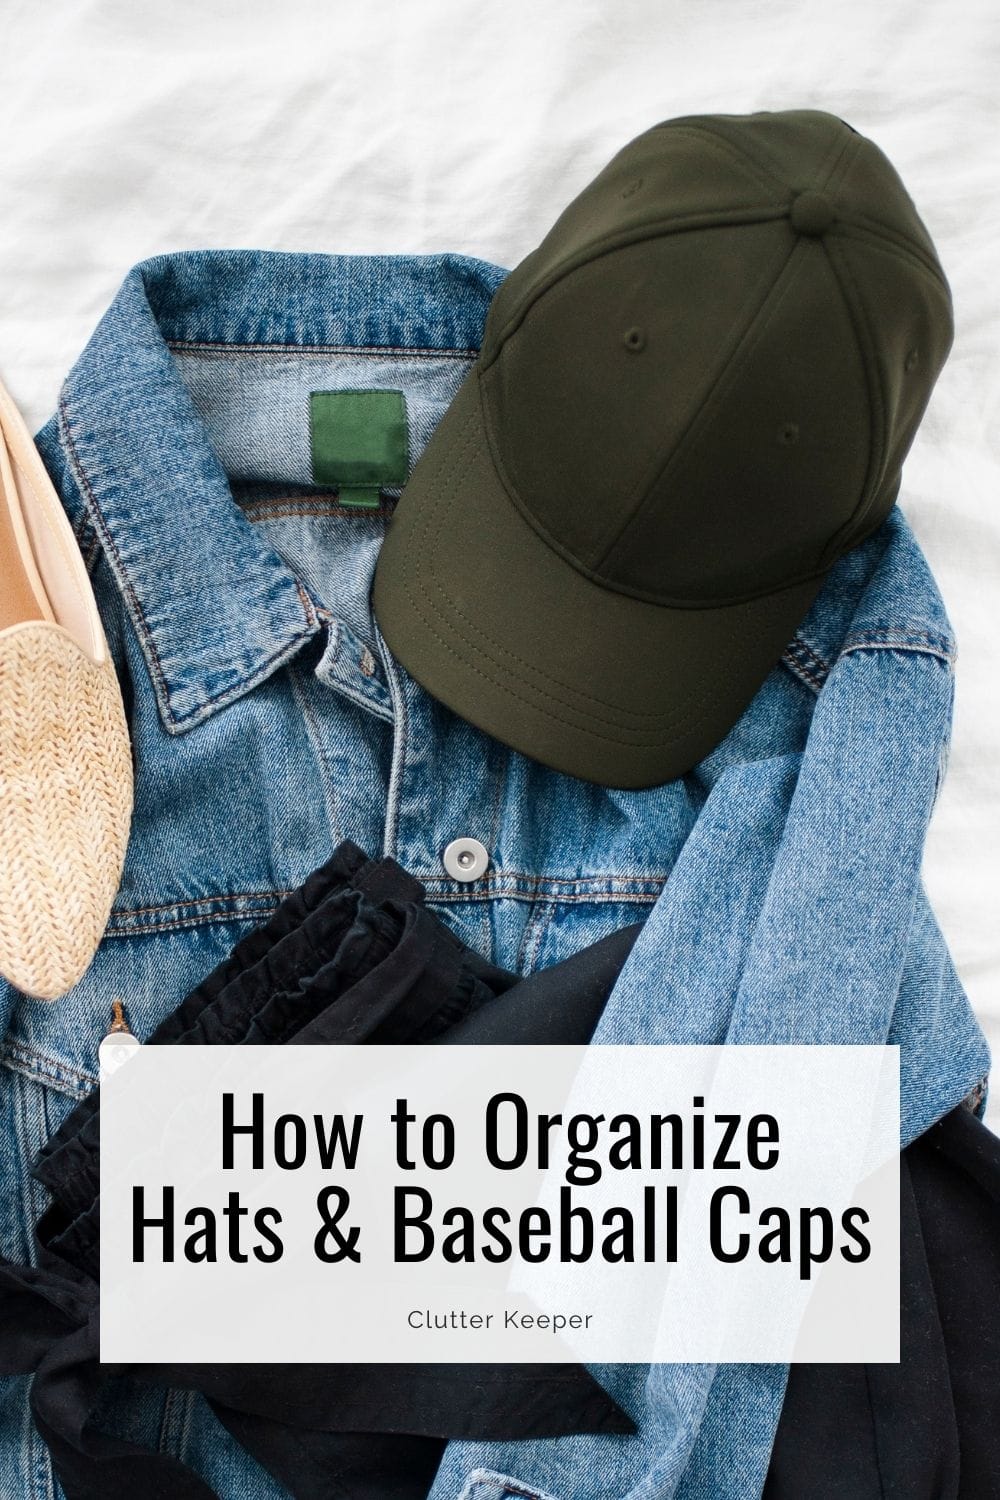 How to organize hats and baseball caps.